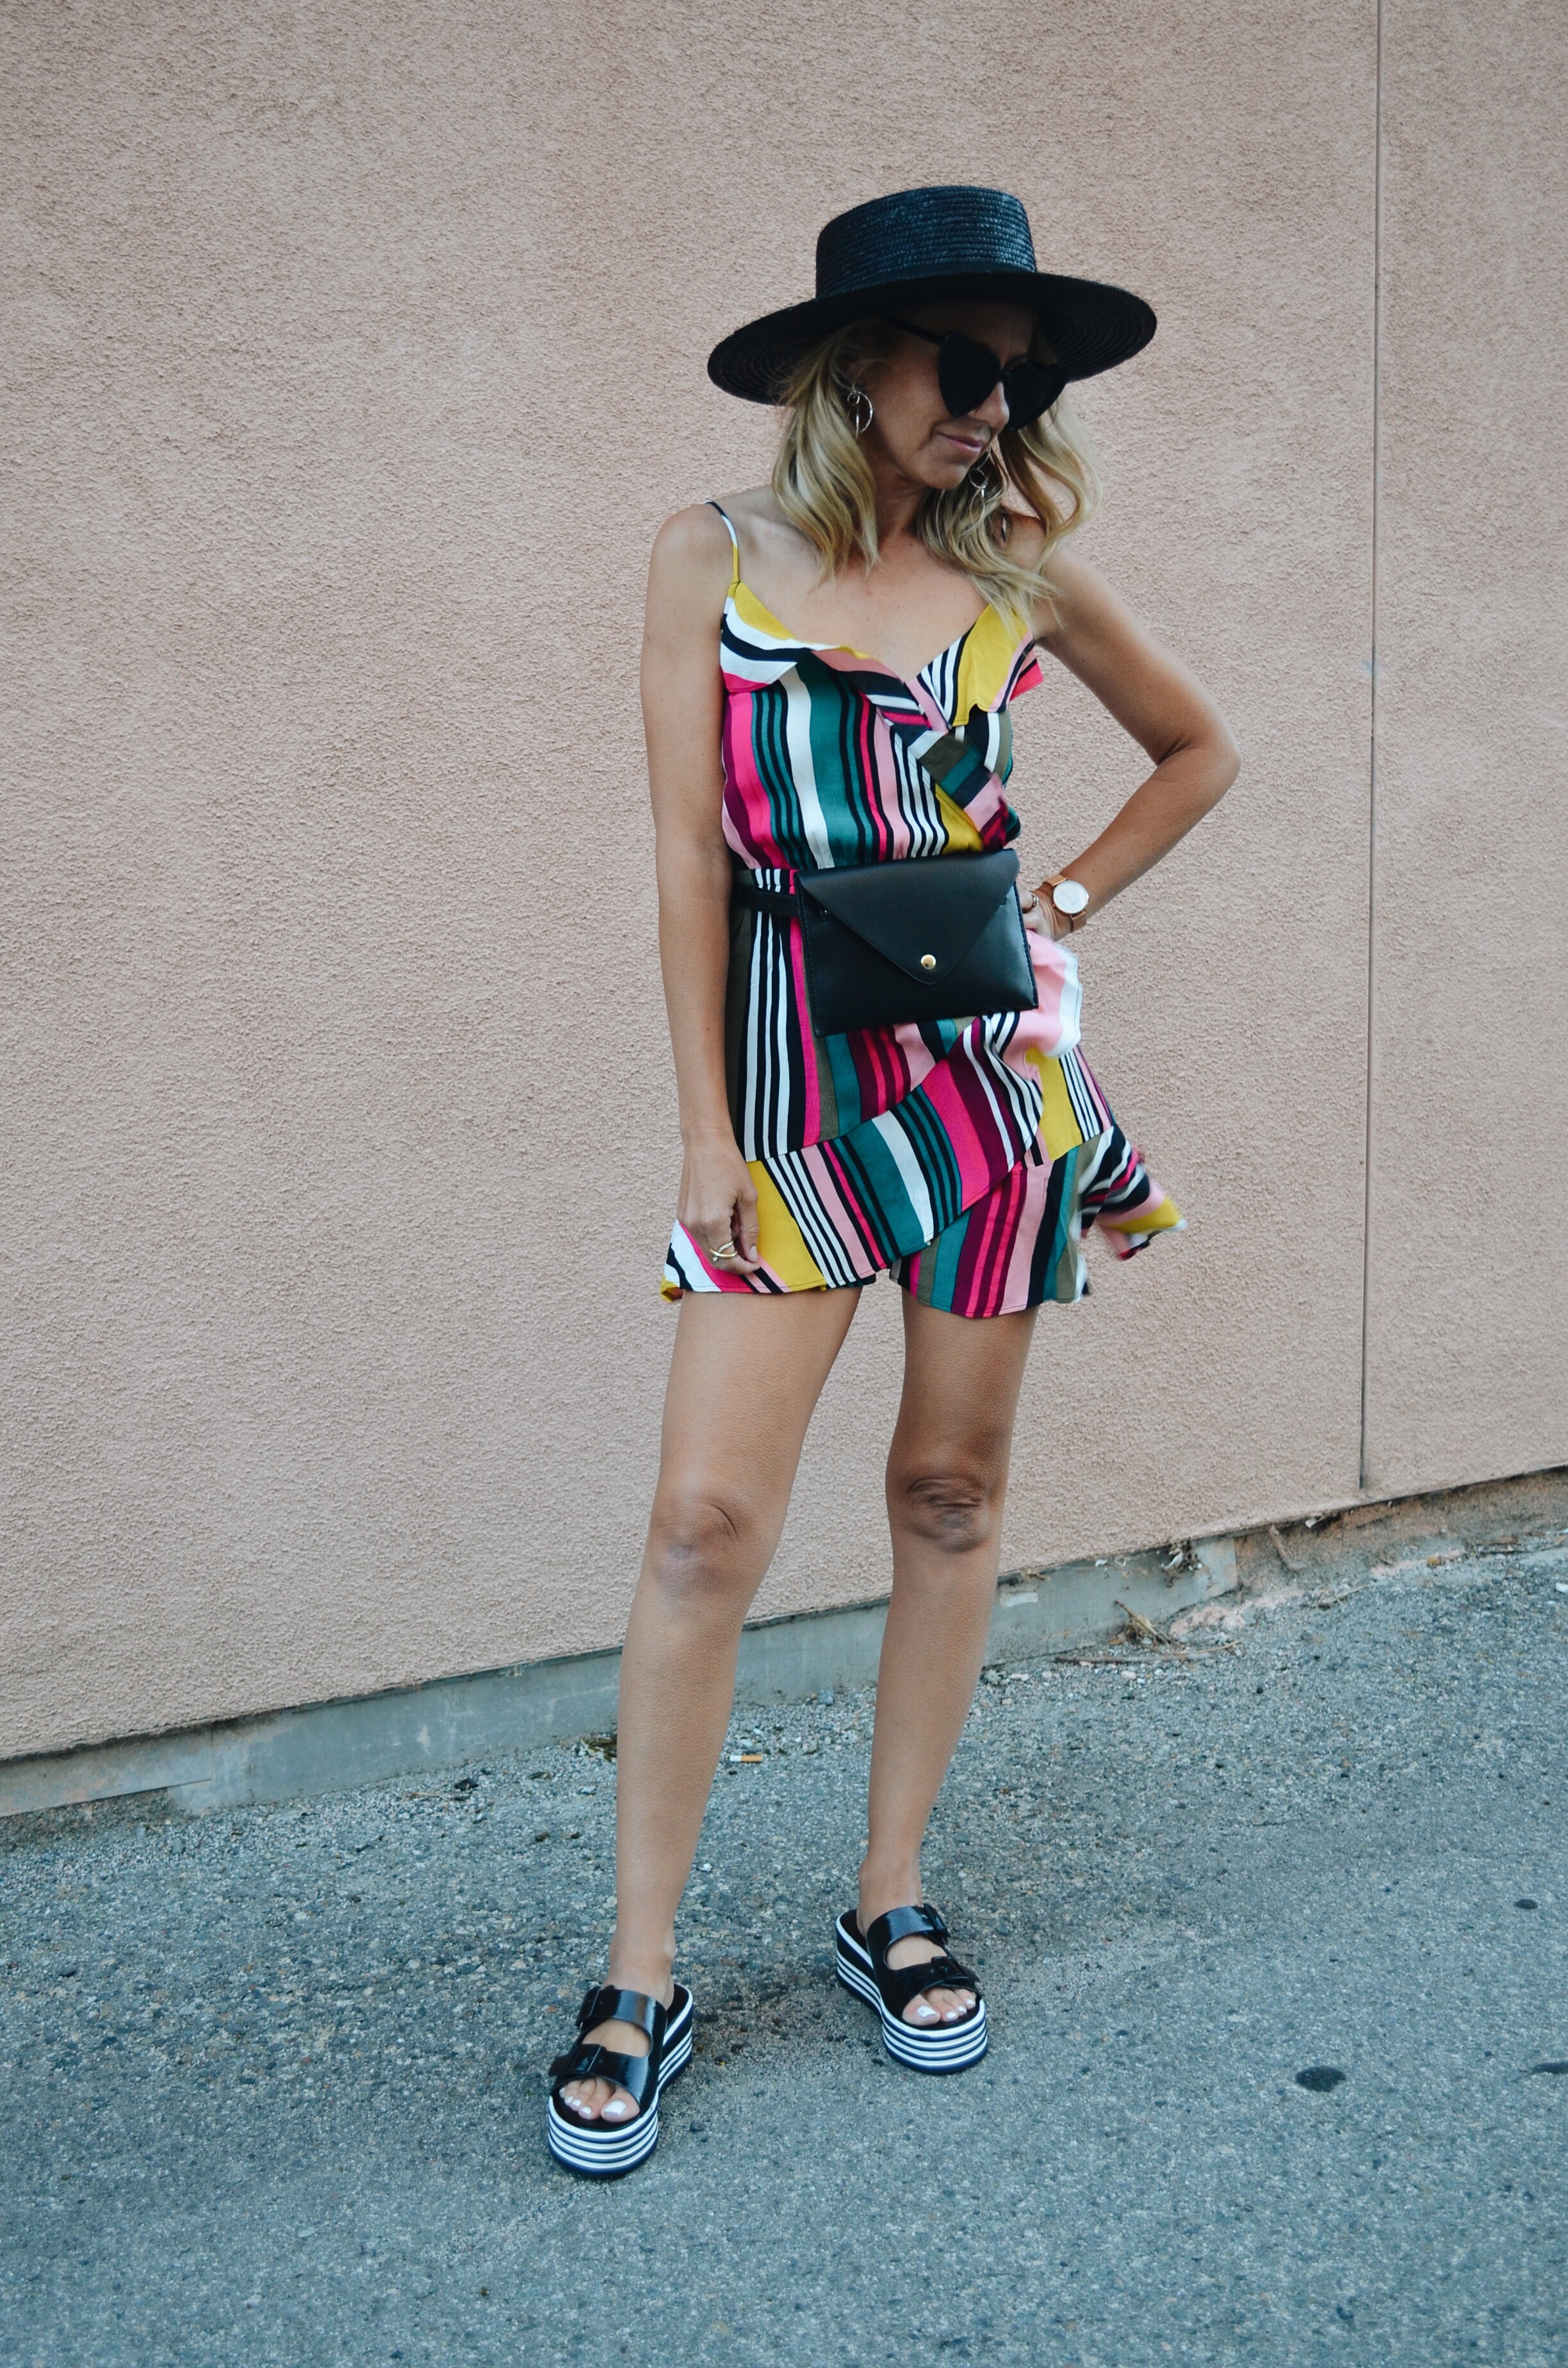 THE MUST HAVE SHOE TREND- PLATFORMS- Jaclyn De Leon Style + striped ruffle dress + belt bag + rocketdog slip on platforms + straw hat + express dress + what to wear this summer + street style